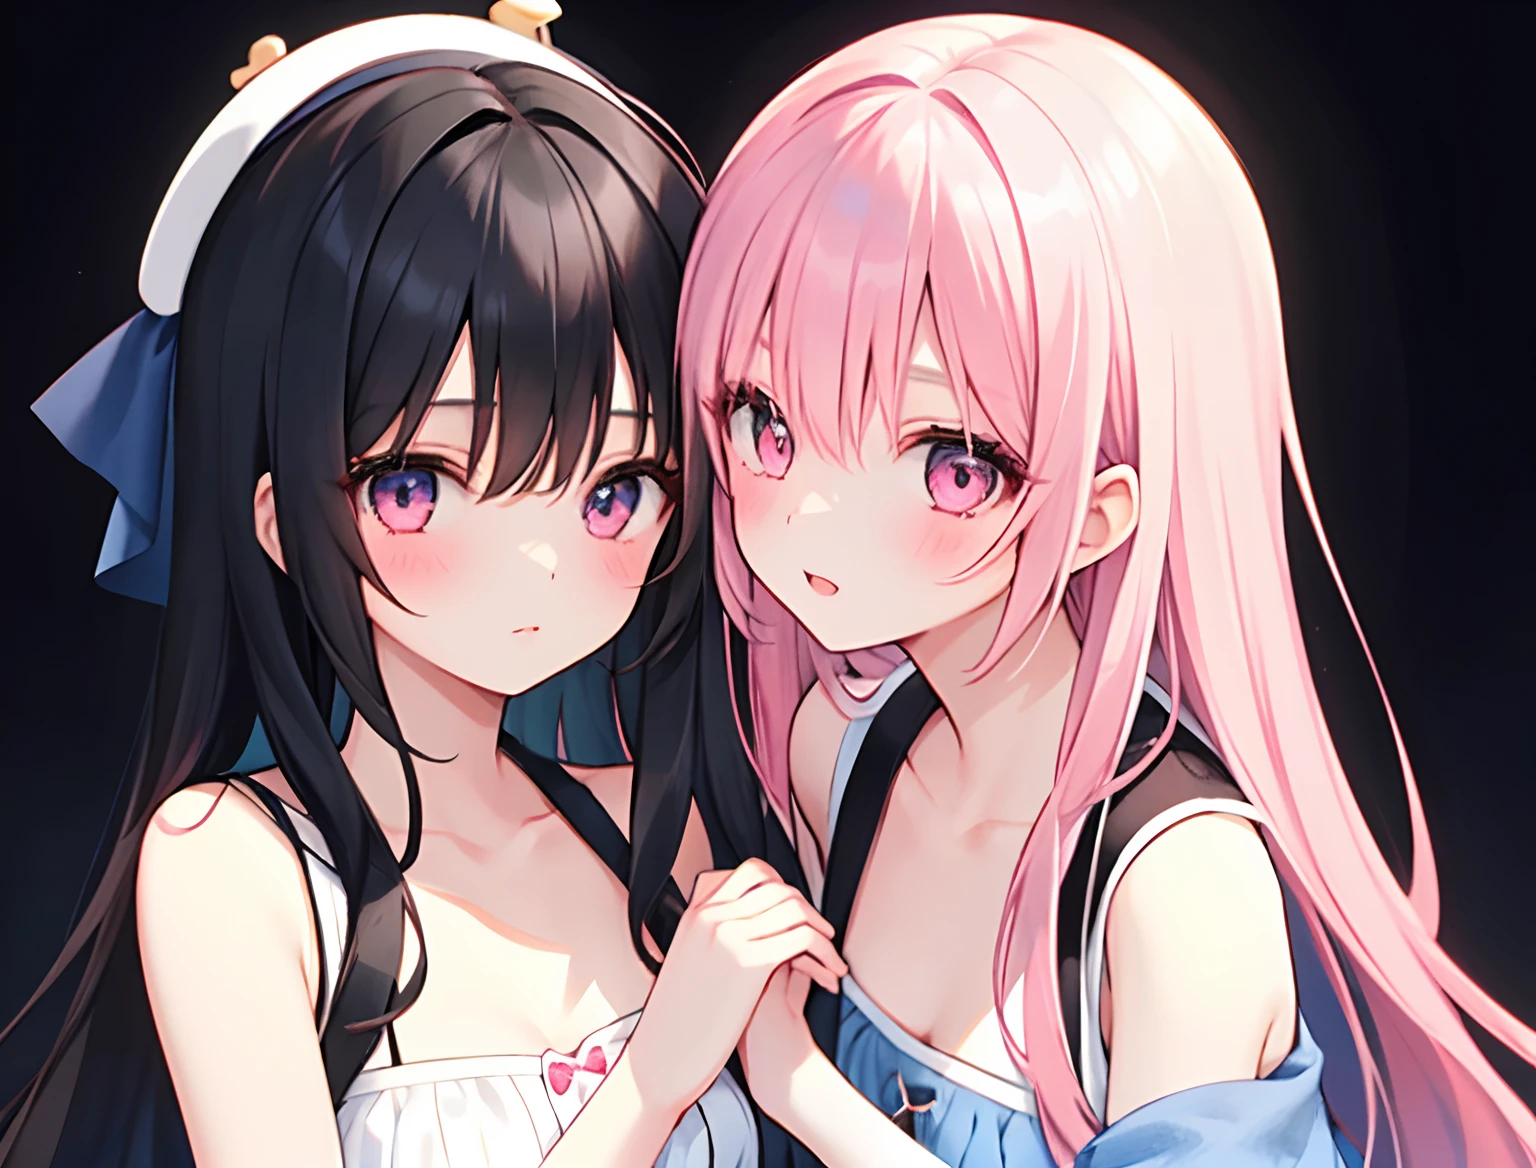 2girls，Girl1：，adolable，A pink-haired，long whitr hair，girl 2：black color hair，long whitr hair，Touch each other's chests